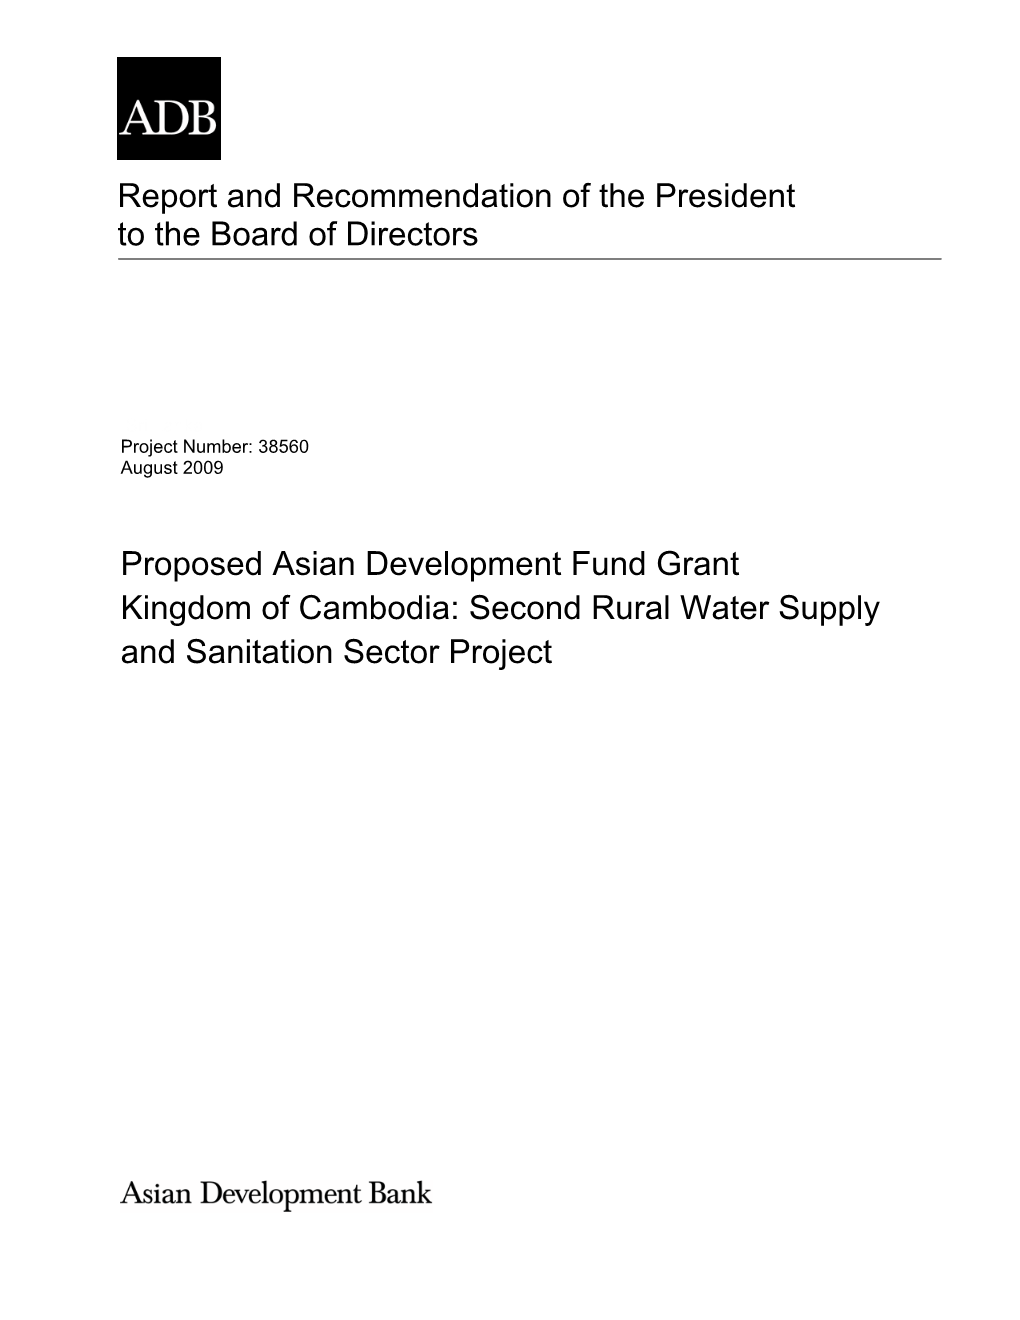 Report and Recommendation of the President to the Board of Directors Proposed Asian Development Fund Grant Kingdom of Cambodia